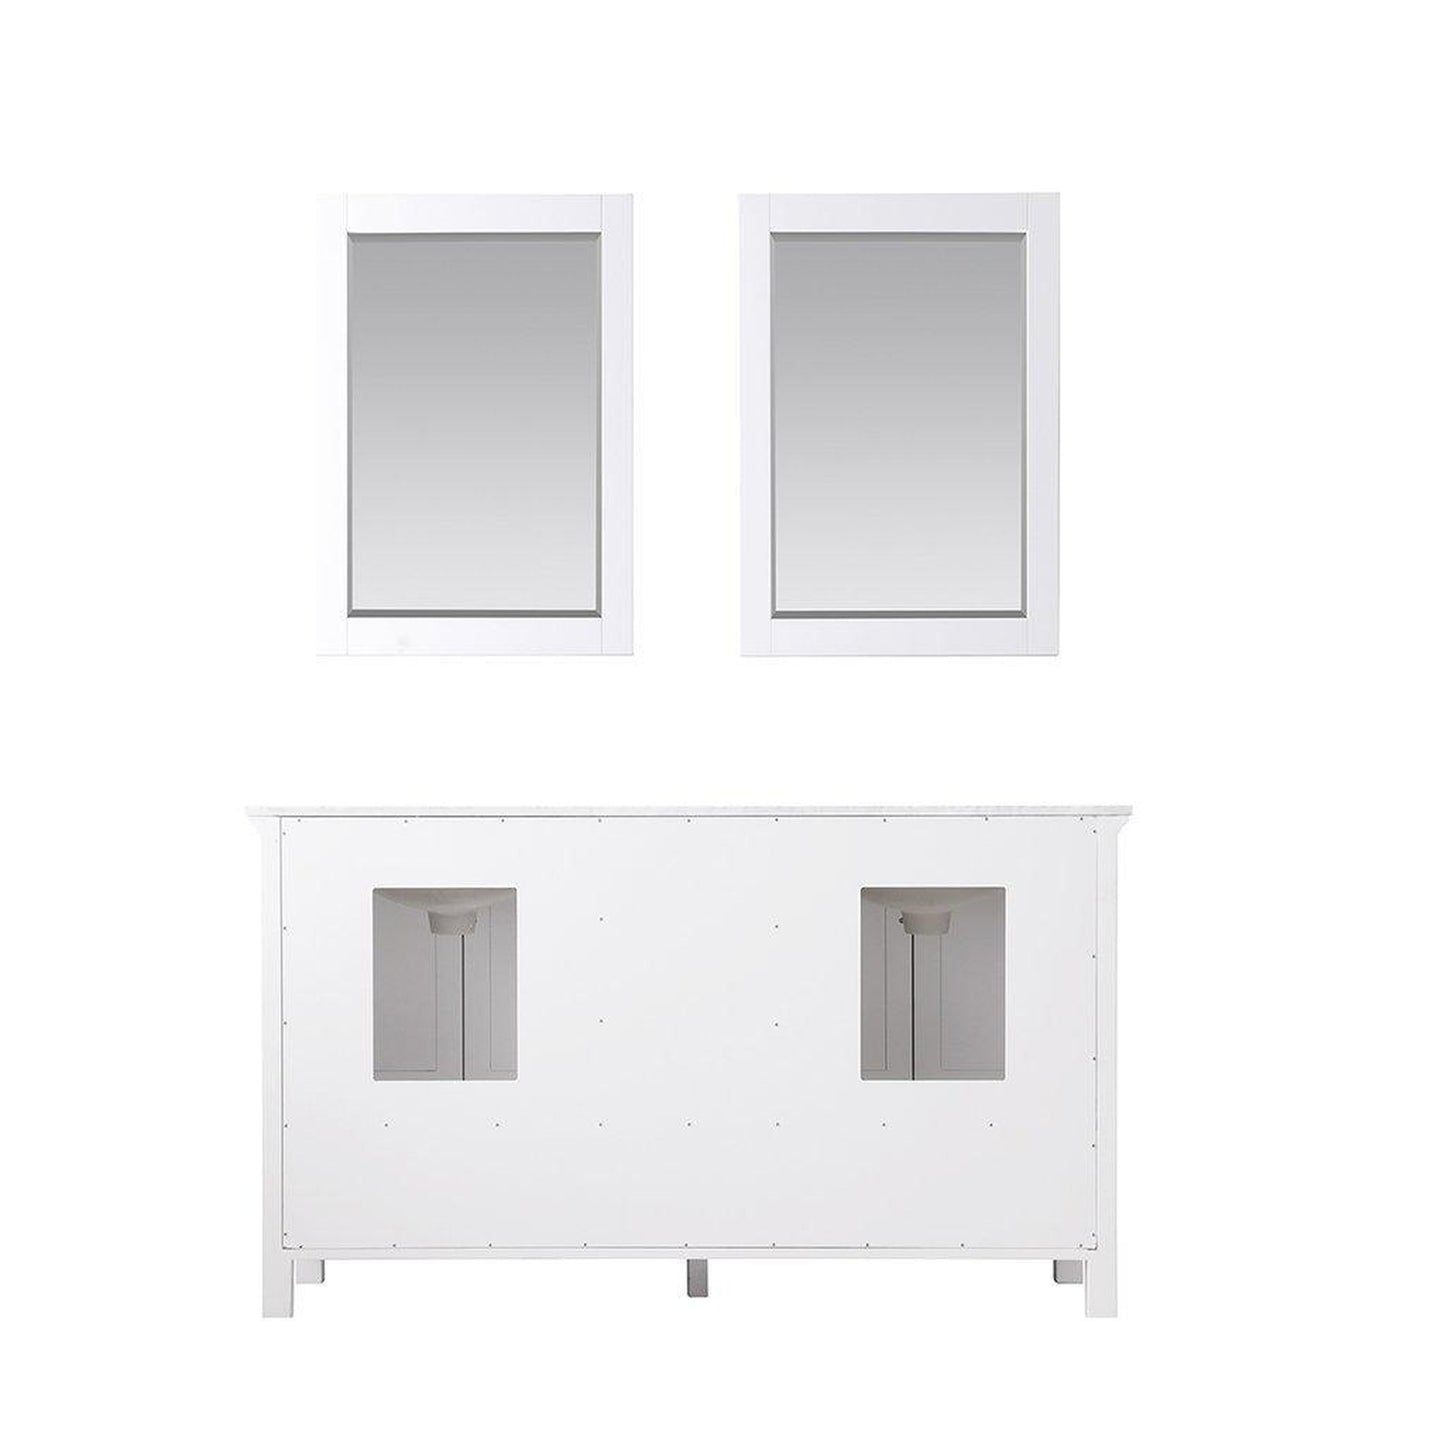 Altair Isla 60" Double White Freestanding Bathroom Vanity Set With Mirror, Natural Carrara White Marble Top, Two Rectangular Undermount Ceramic Sinks, and Overflow